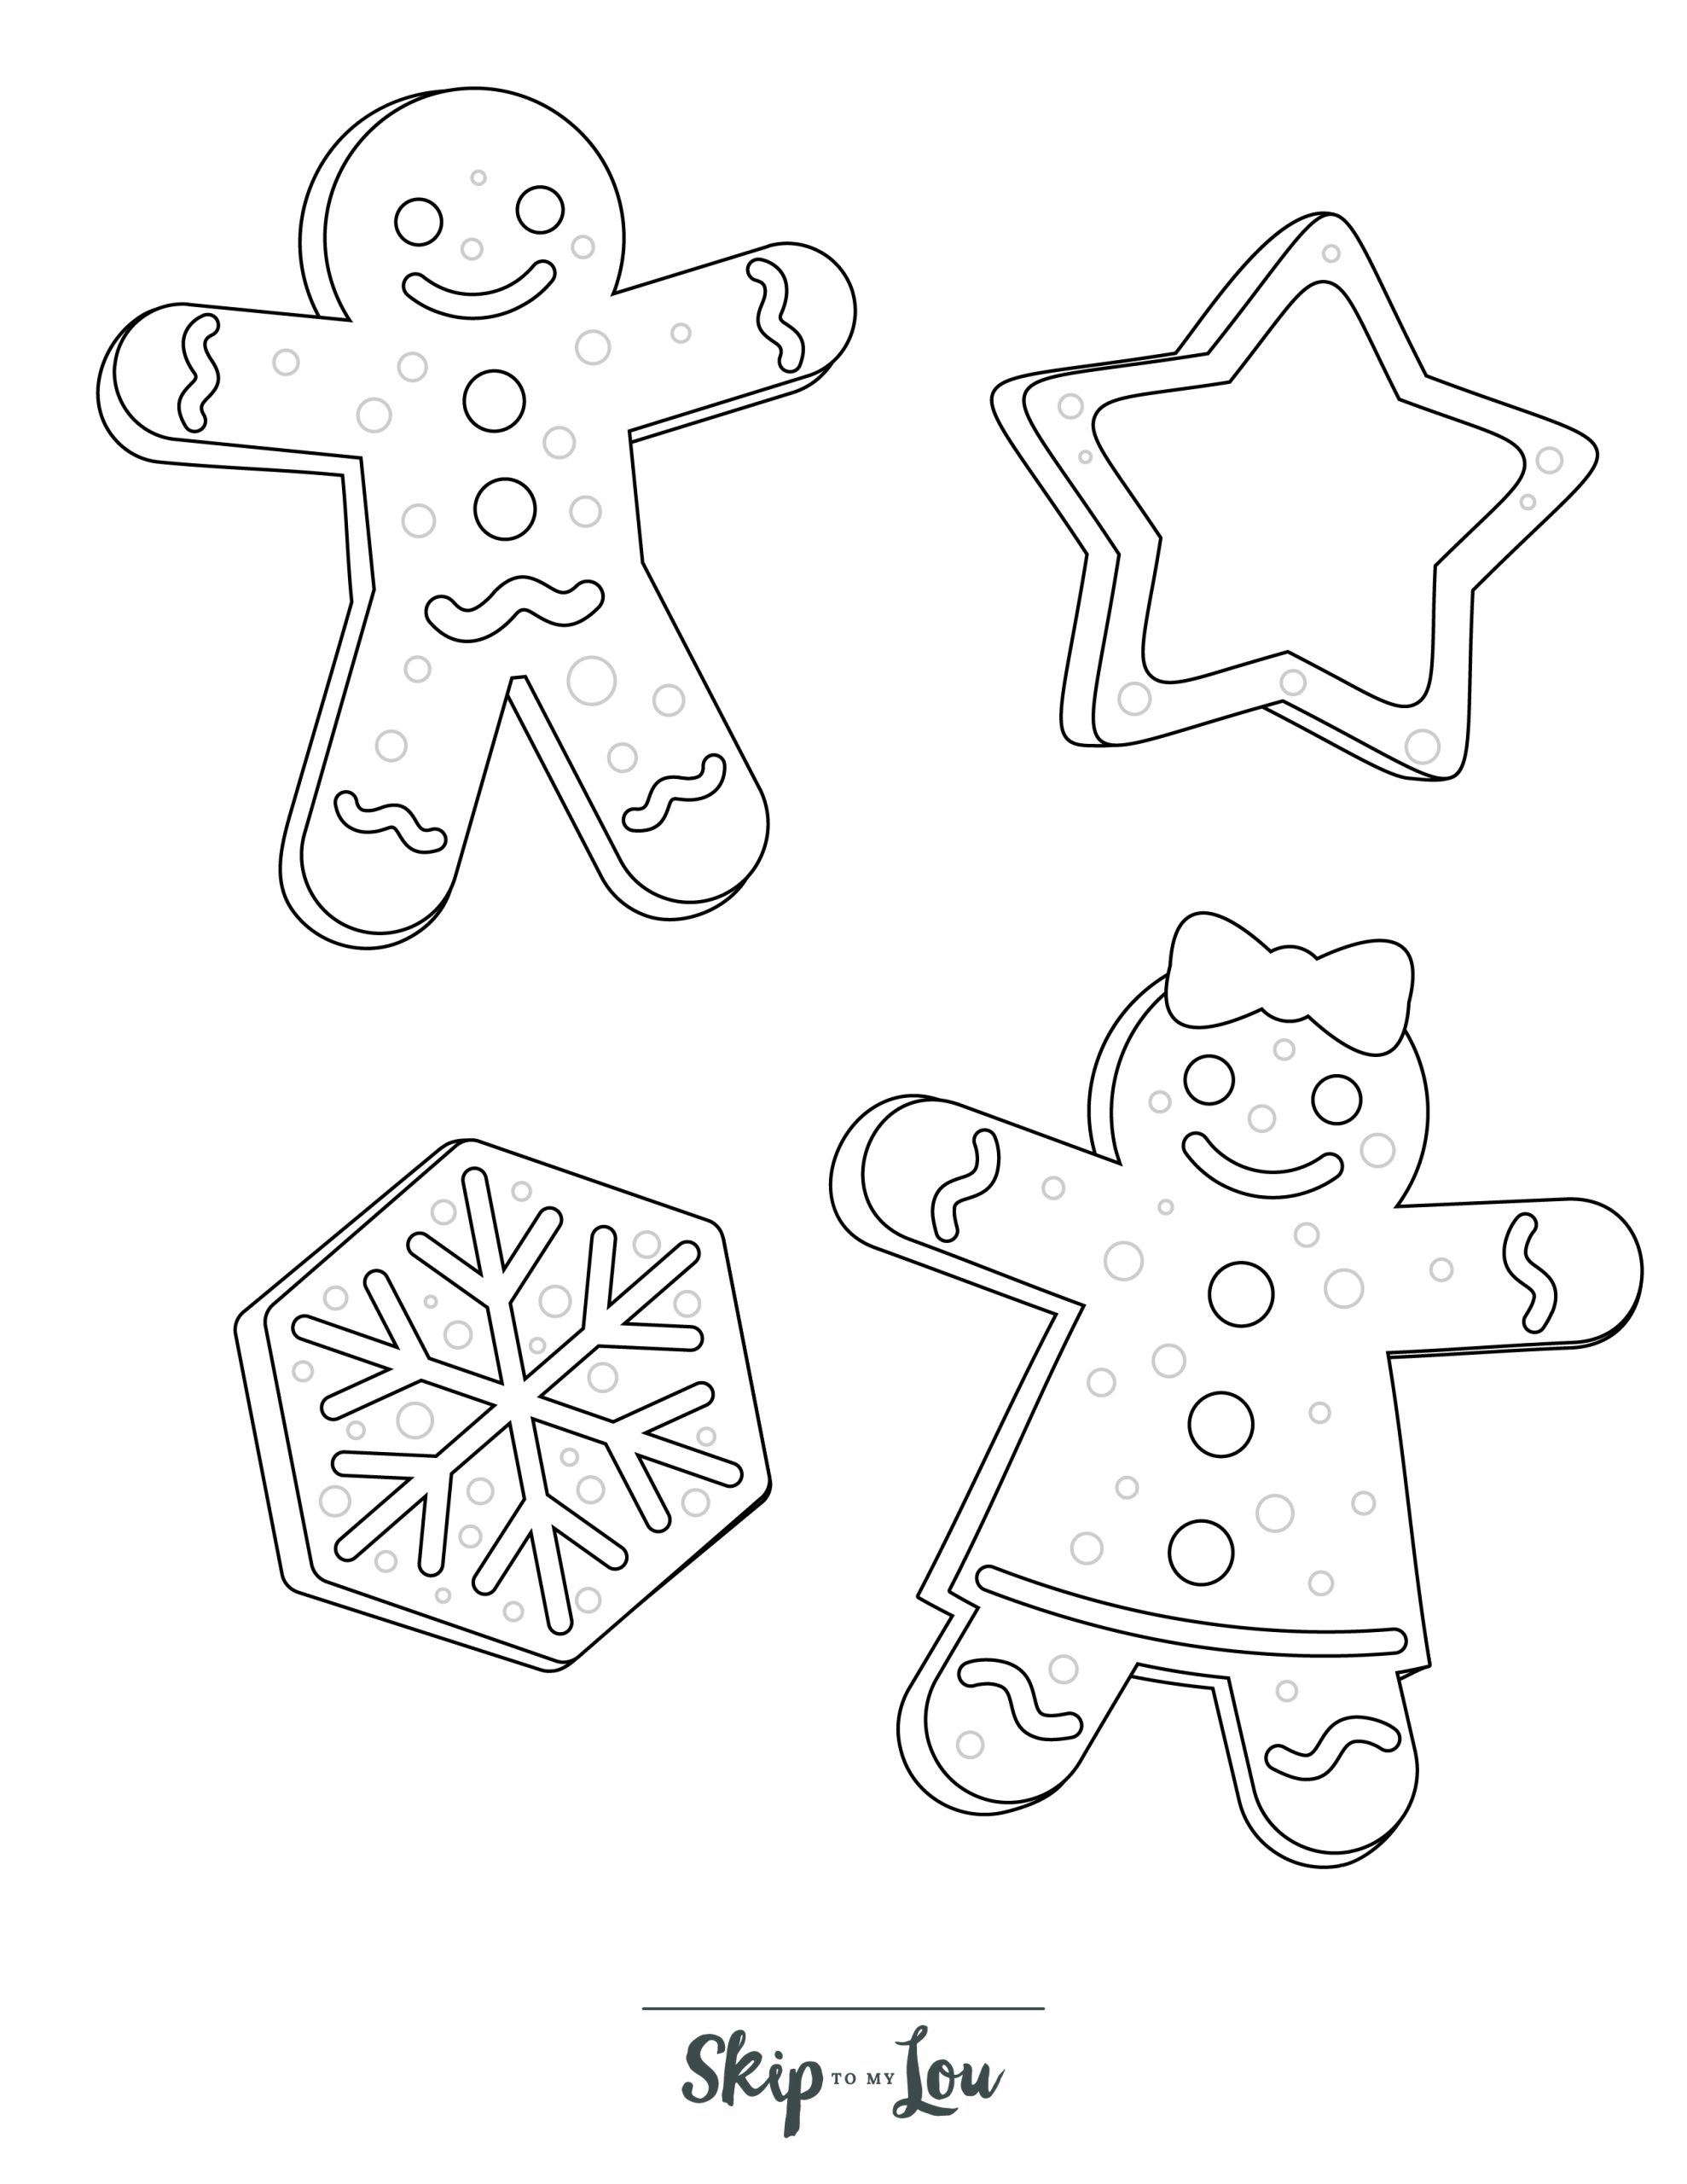 Holiday Coloring Page 1 - Line drawing of different Christmas cookies 